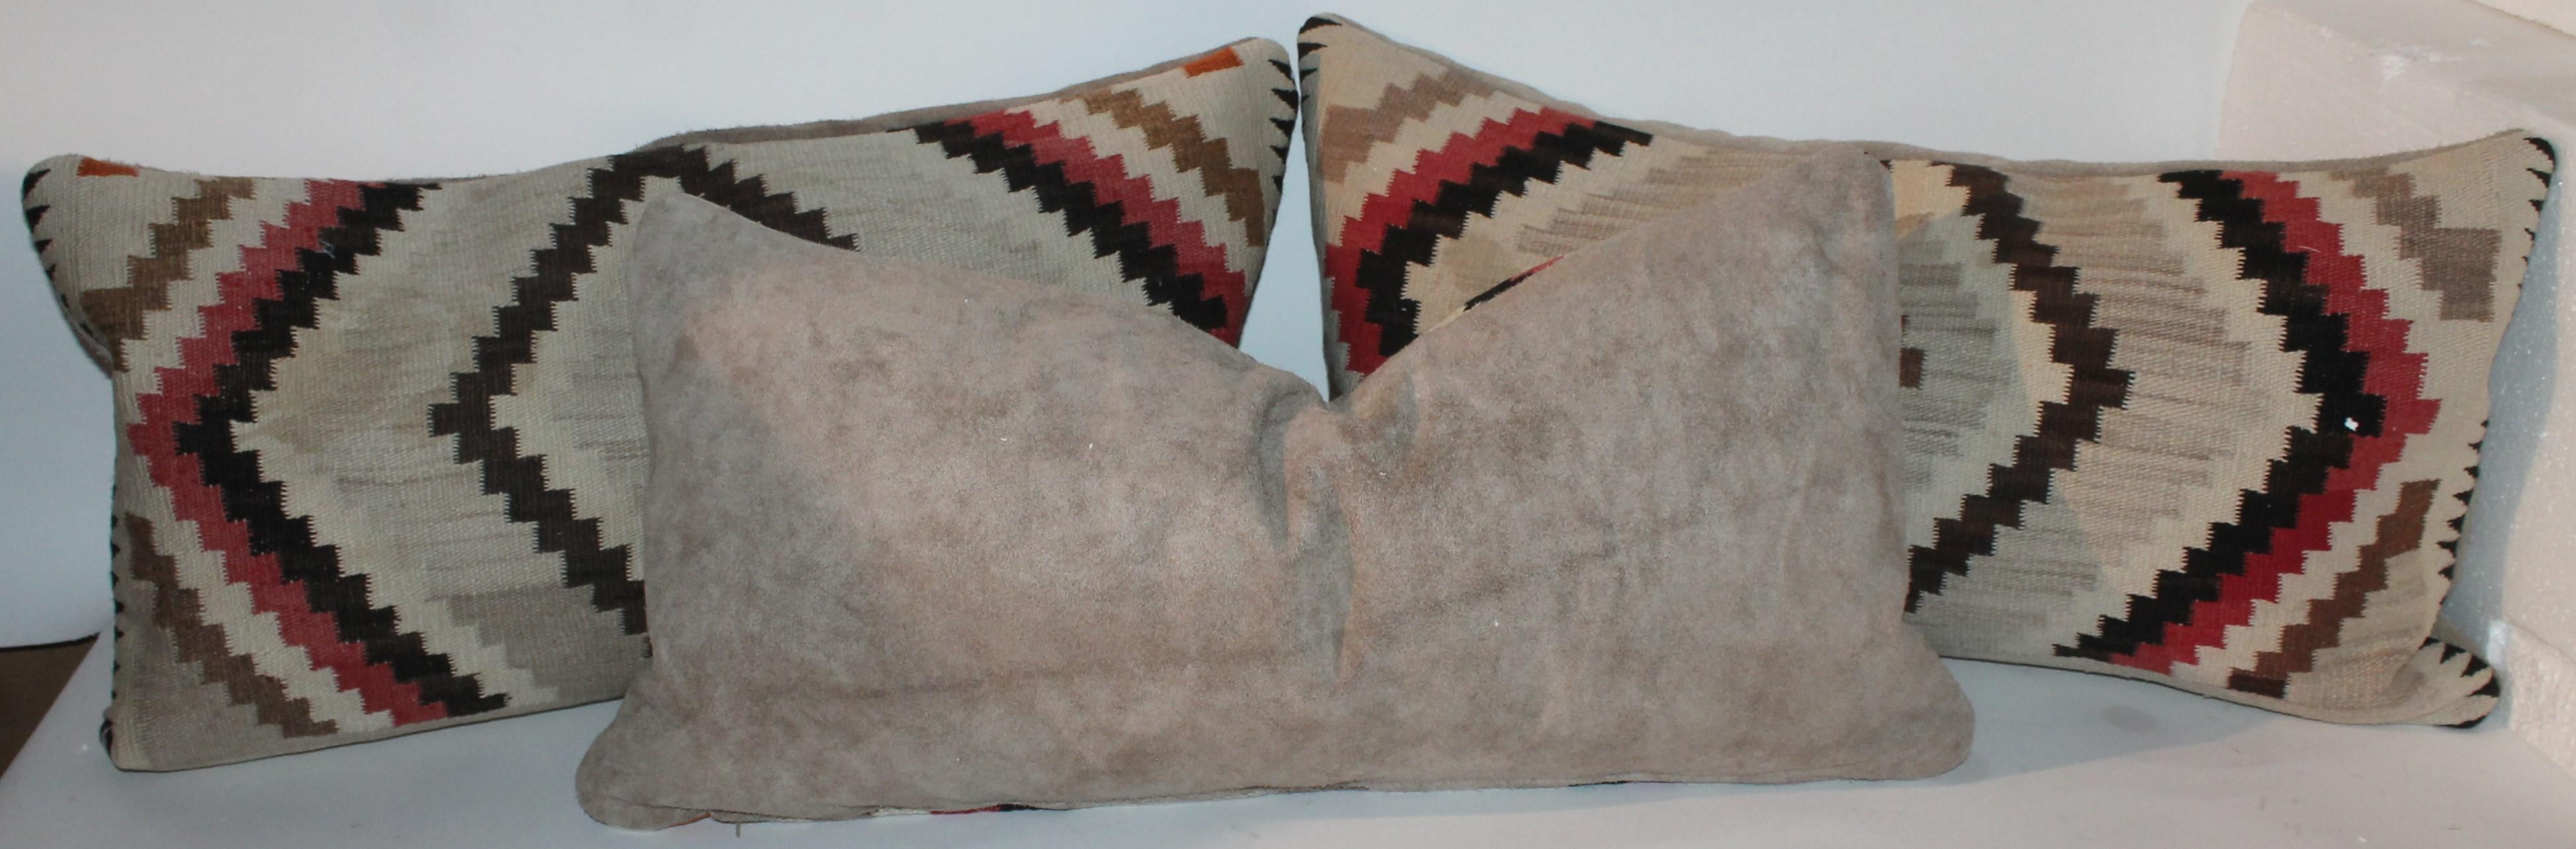 Hand-Crafted Navajo Indian Weaving Eye Dazzler Pillows